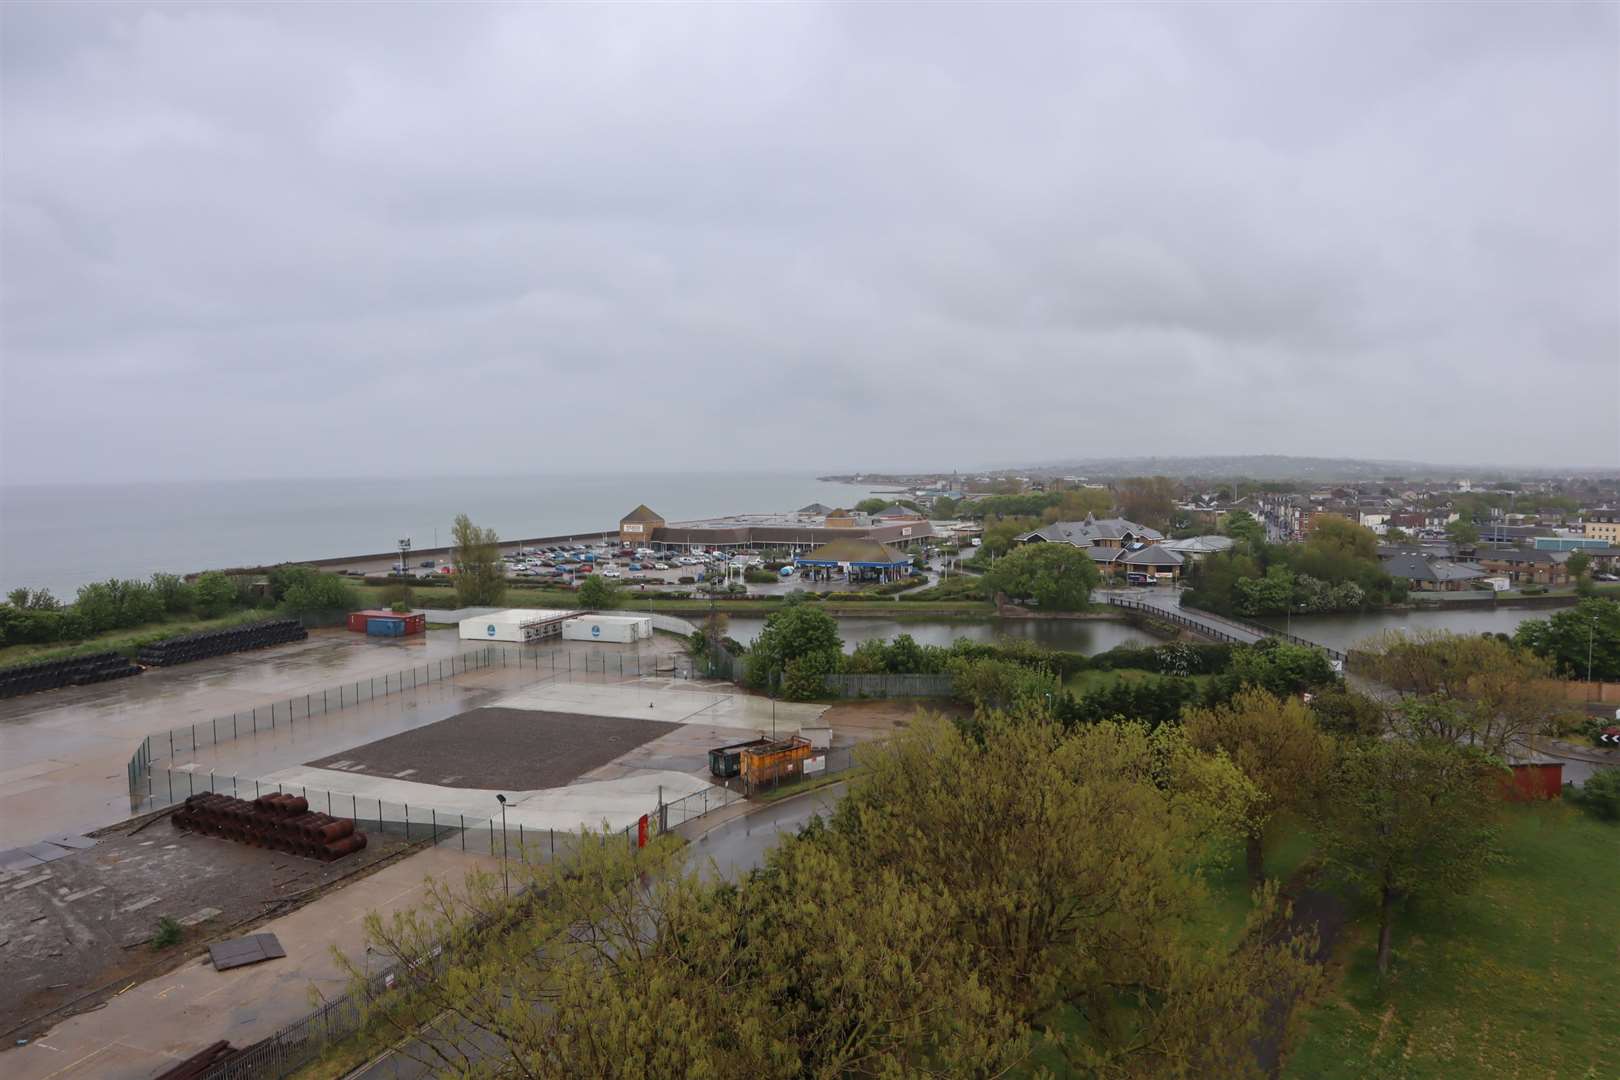 View looking towards Sheerness from the top of the Dockyard Church, Blue Town